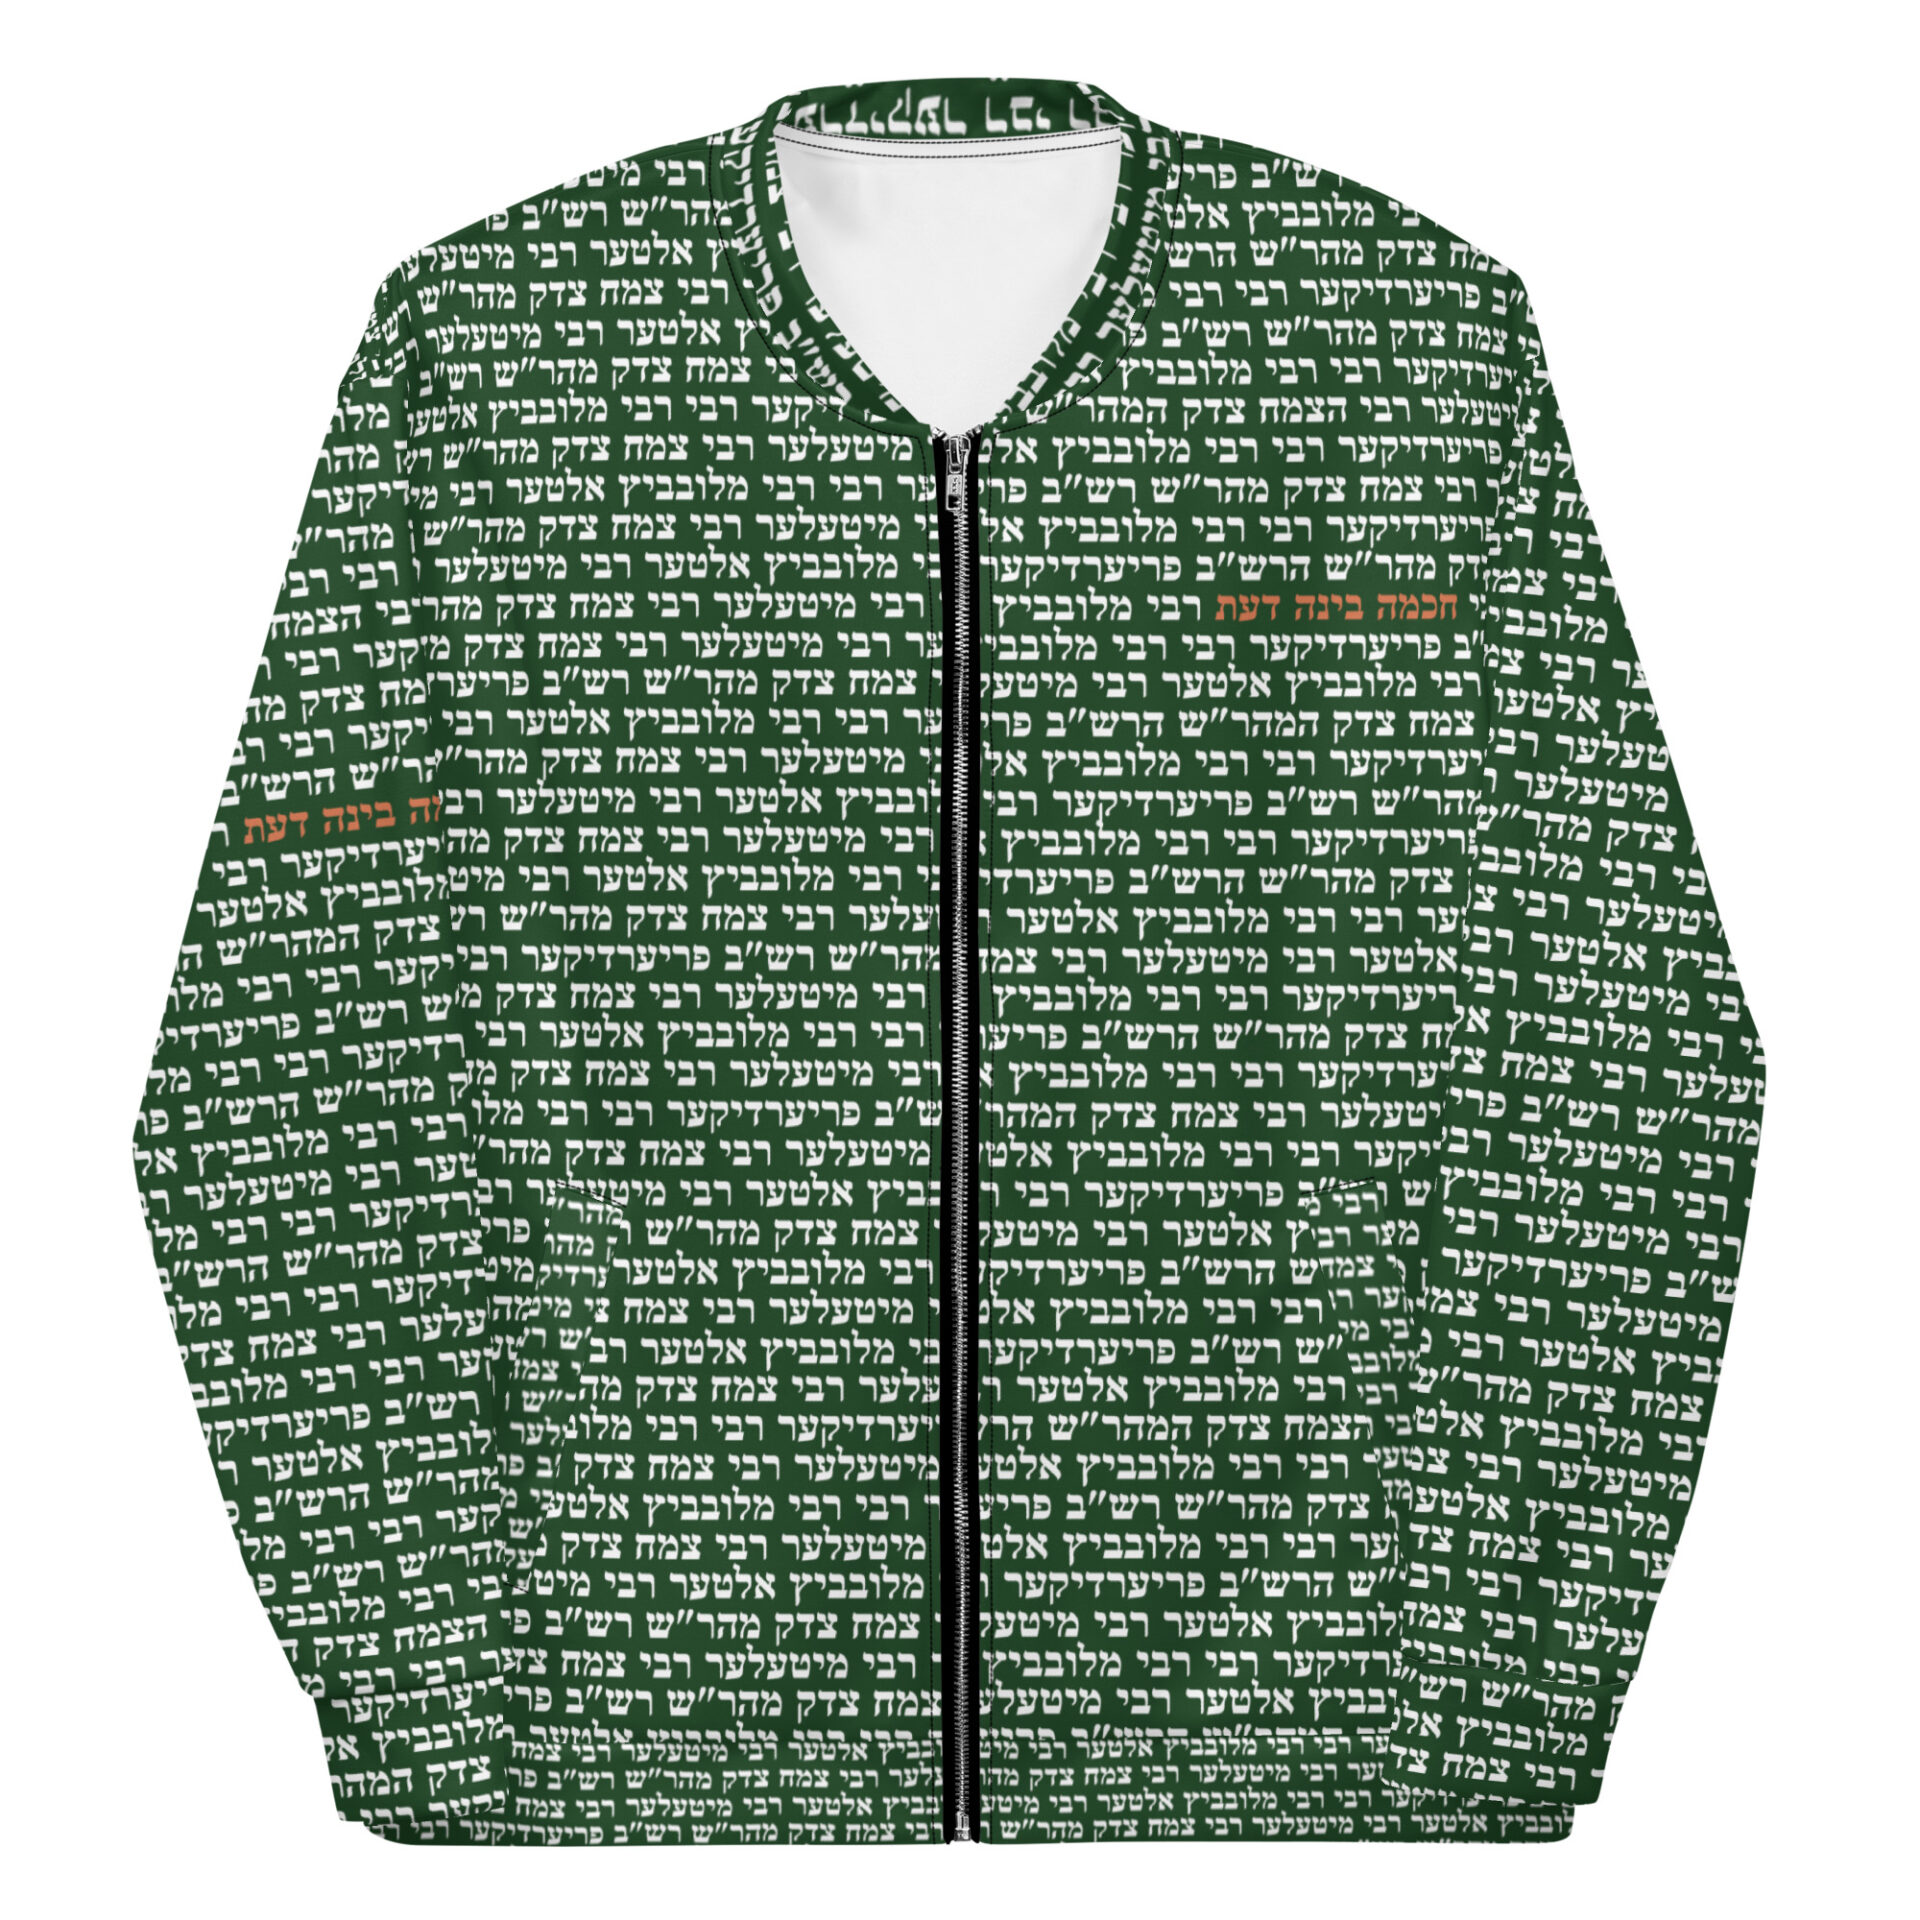 CHABAD Bomber Jacket (WITH THE GIVEN NAMES OF THE 7 CHABAD REBBE'S